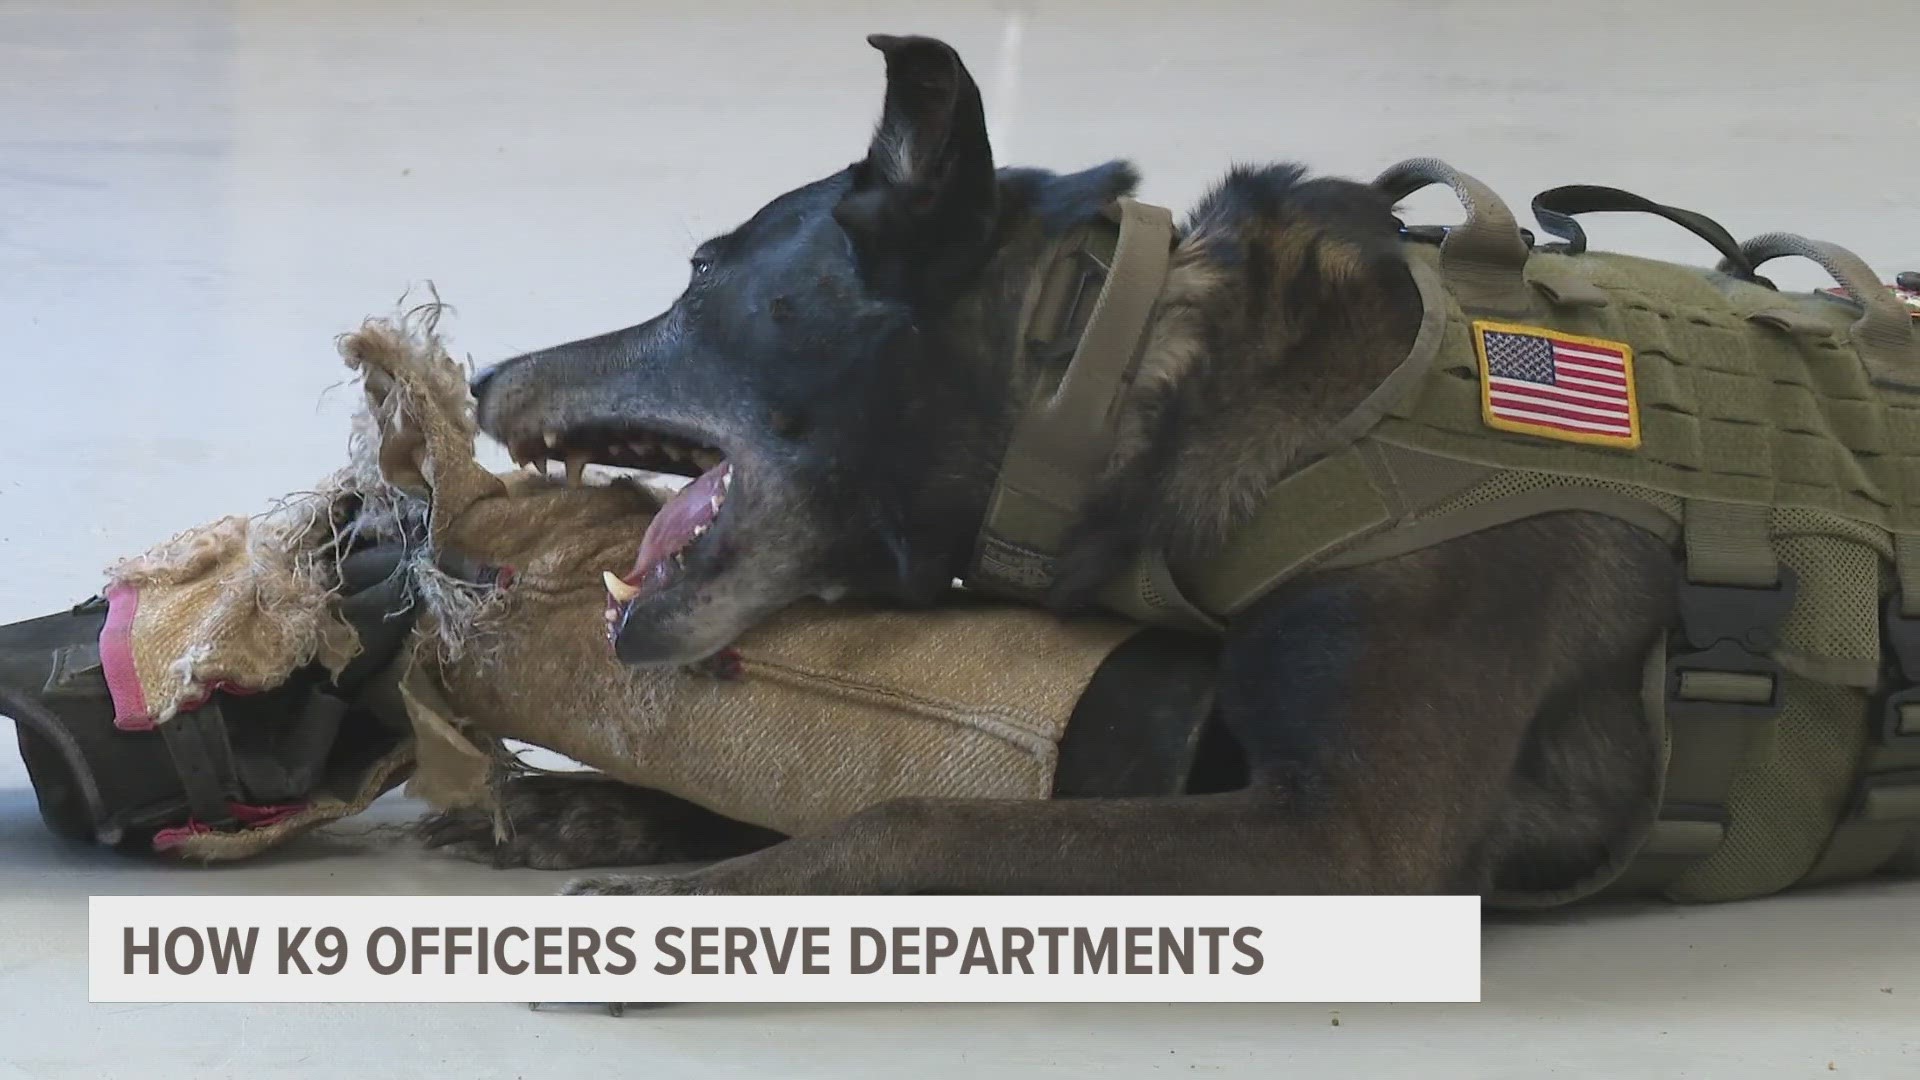 Jason Arnold of Grand Rapids K9 explained that K9 officers may be deployed if there is an immediate danger to the lives of officers and civilians.